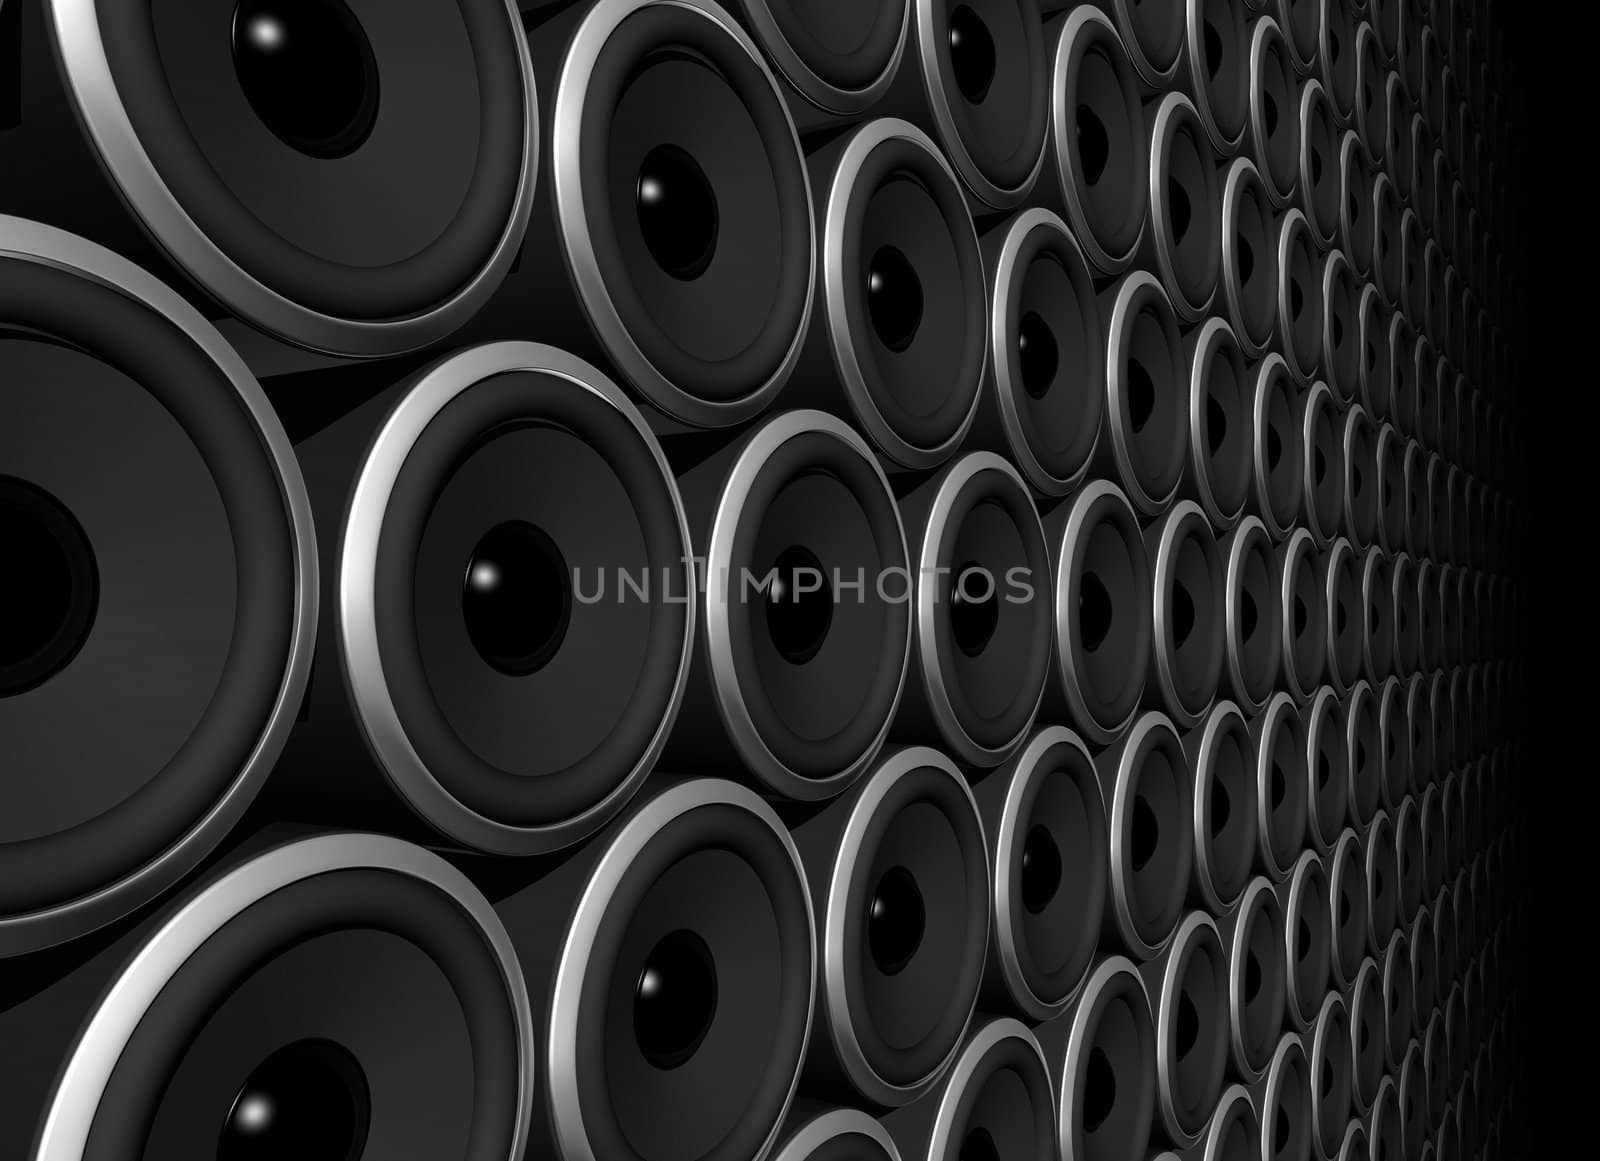 three dimensional speakers wall isolated on black